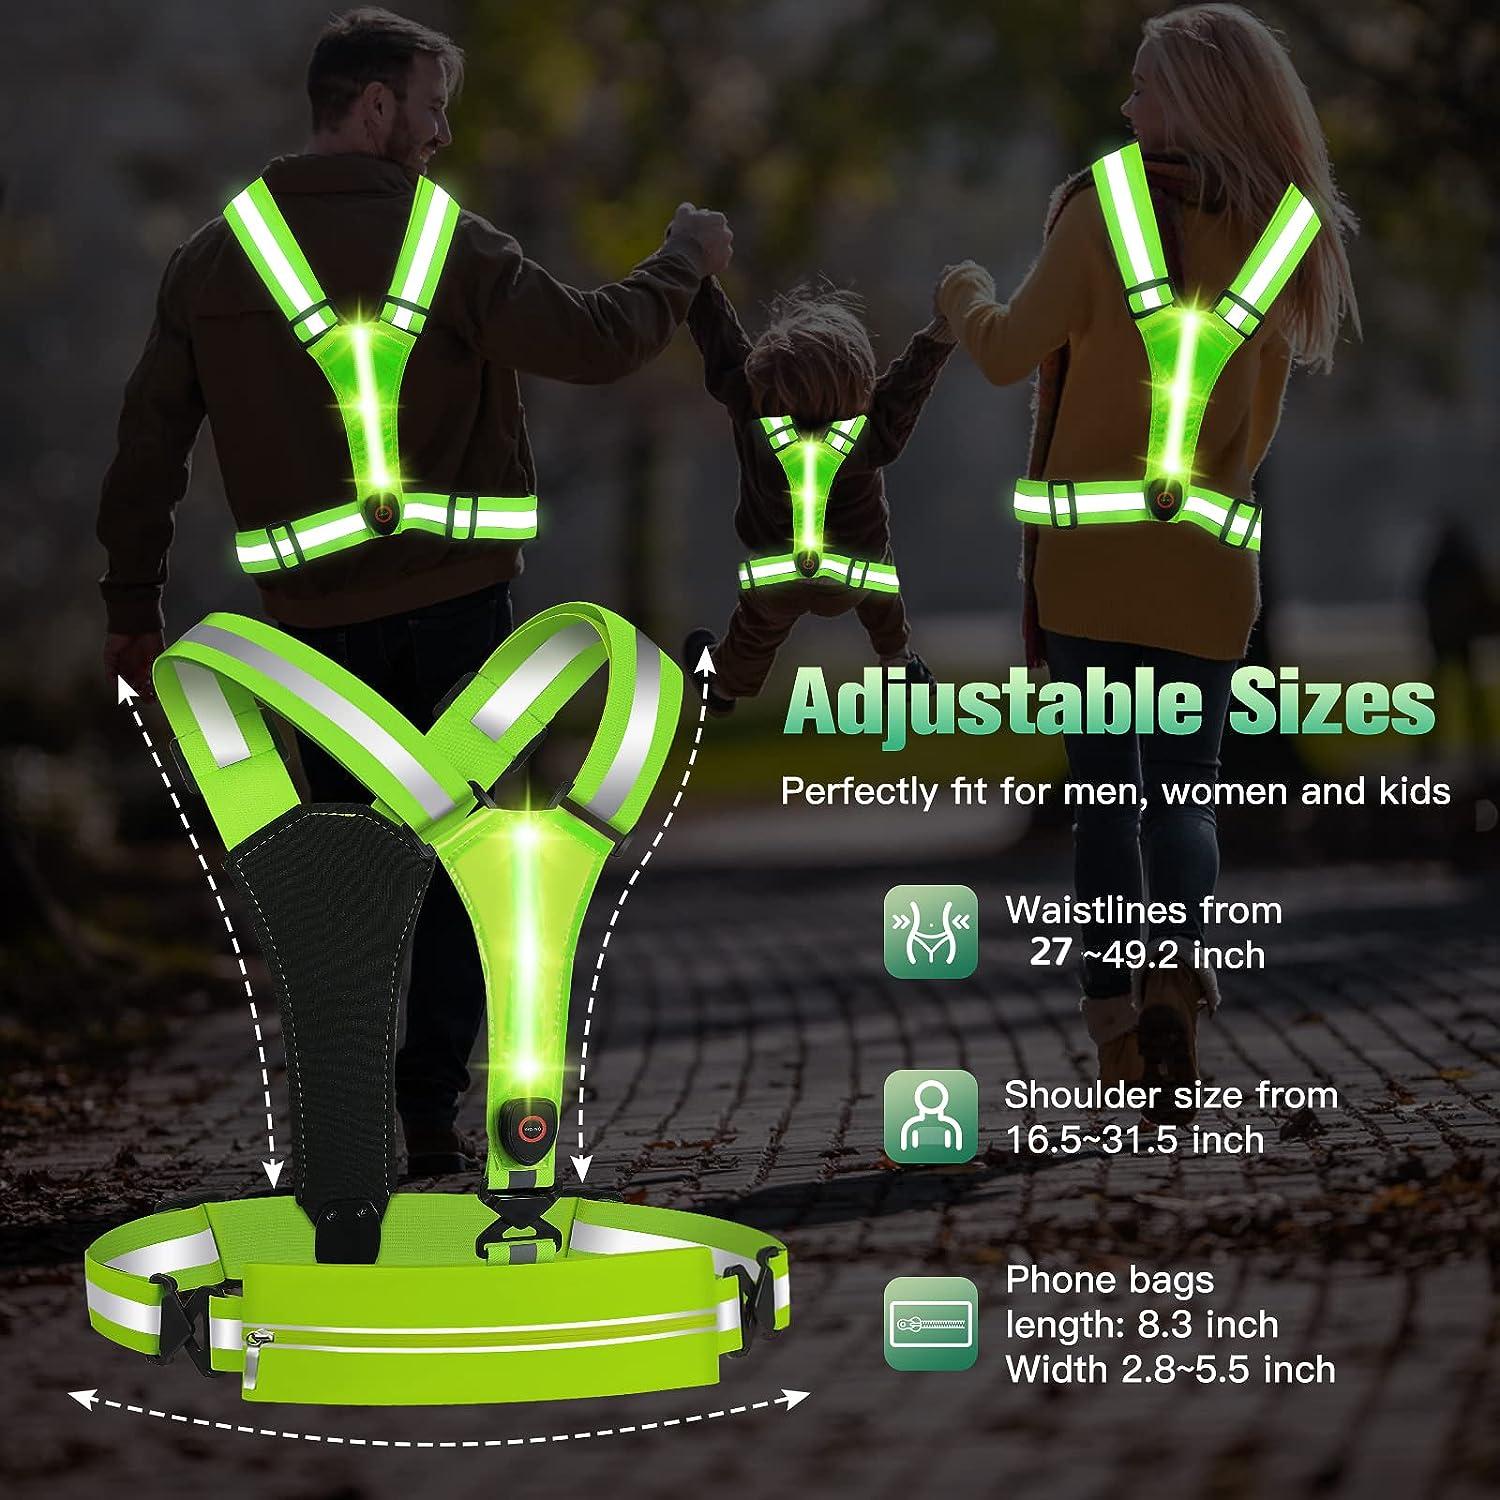 Cheap LED Reflective Vest Running Gear, USB Rechargeable Light Up Safety  Vest for Walking at Night for Runners Walkers Bikers with Adjustable Vest